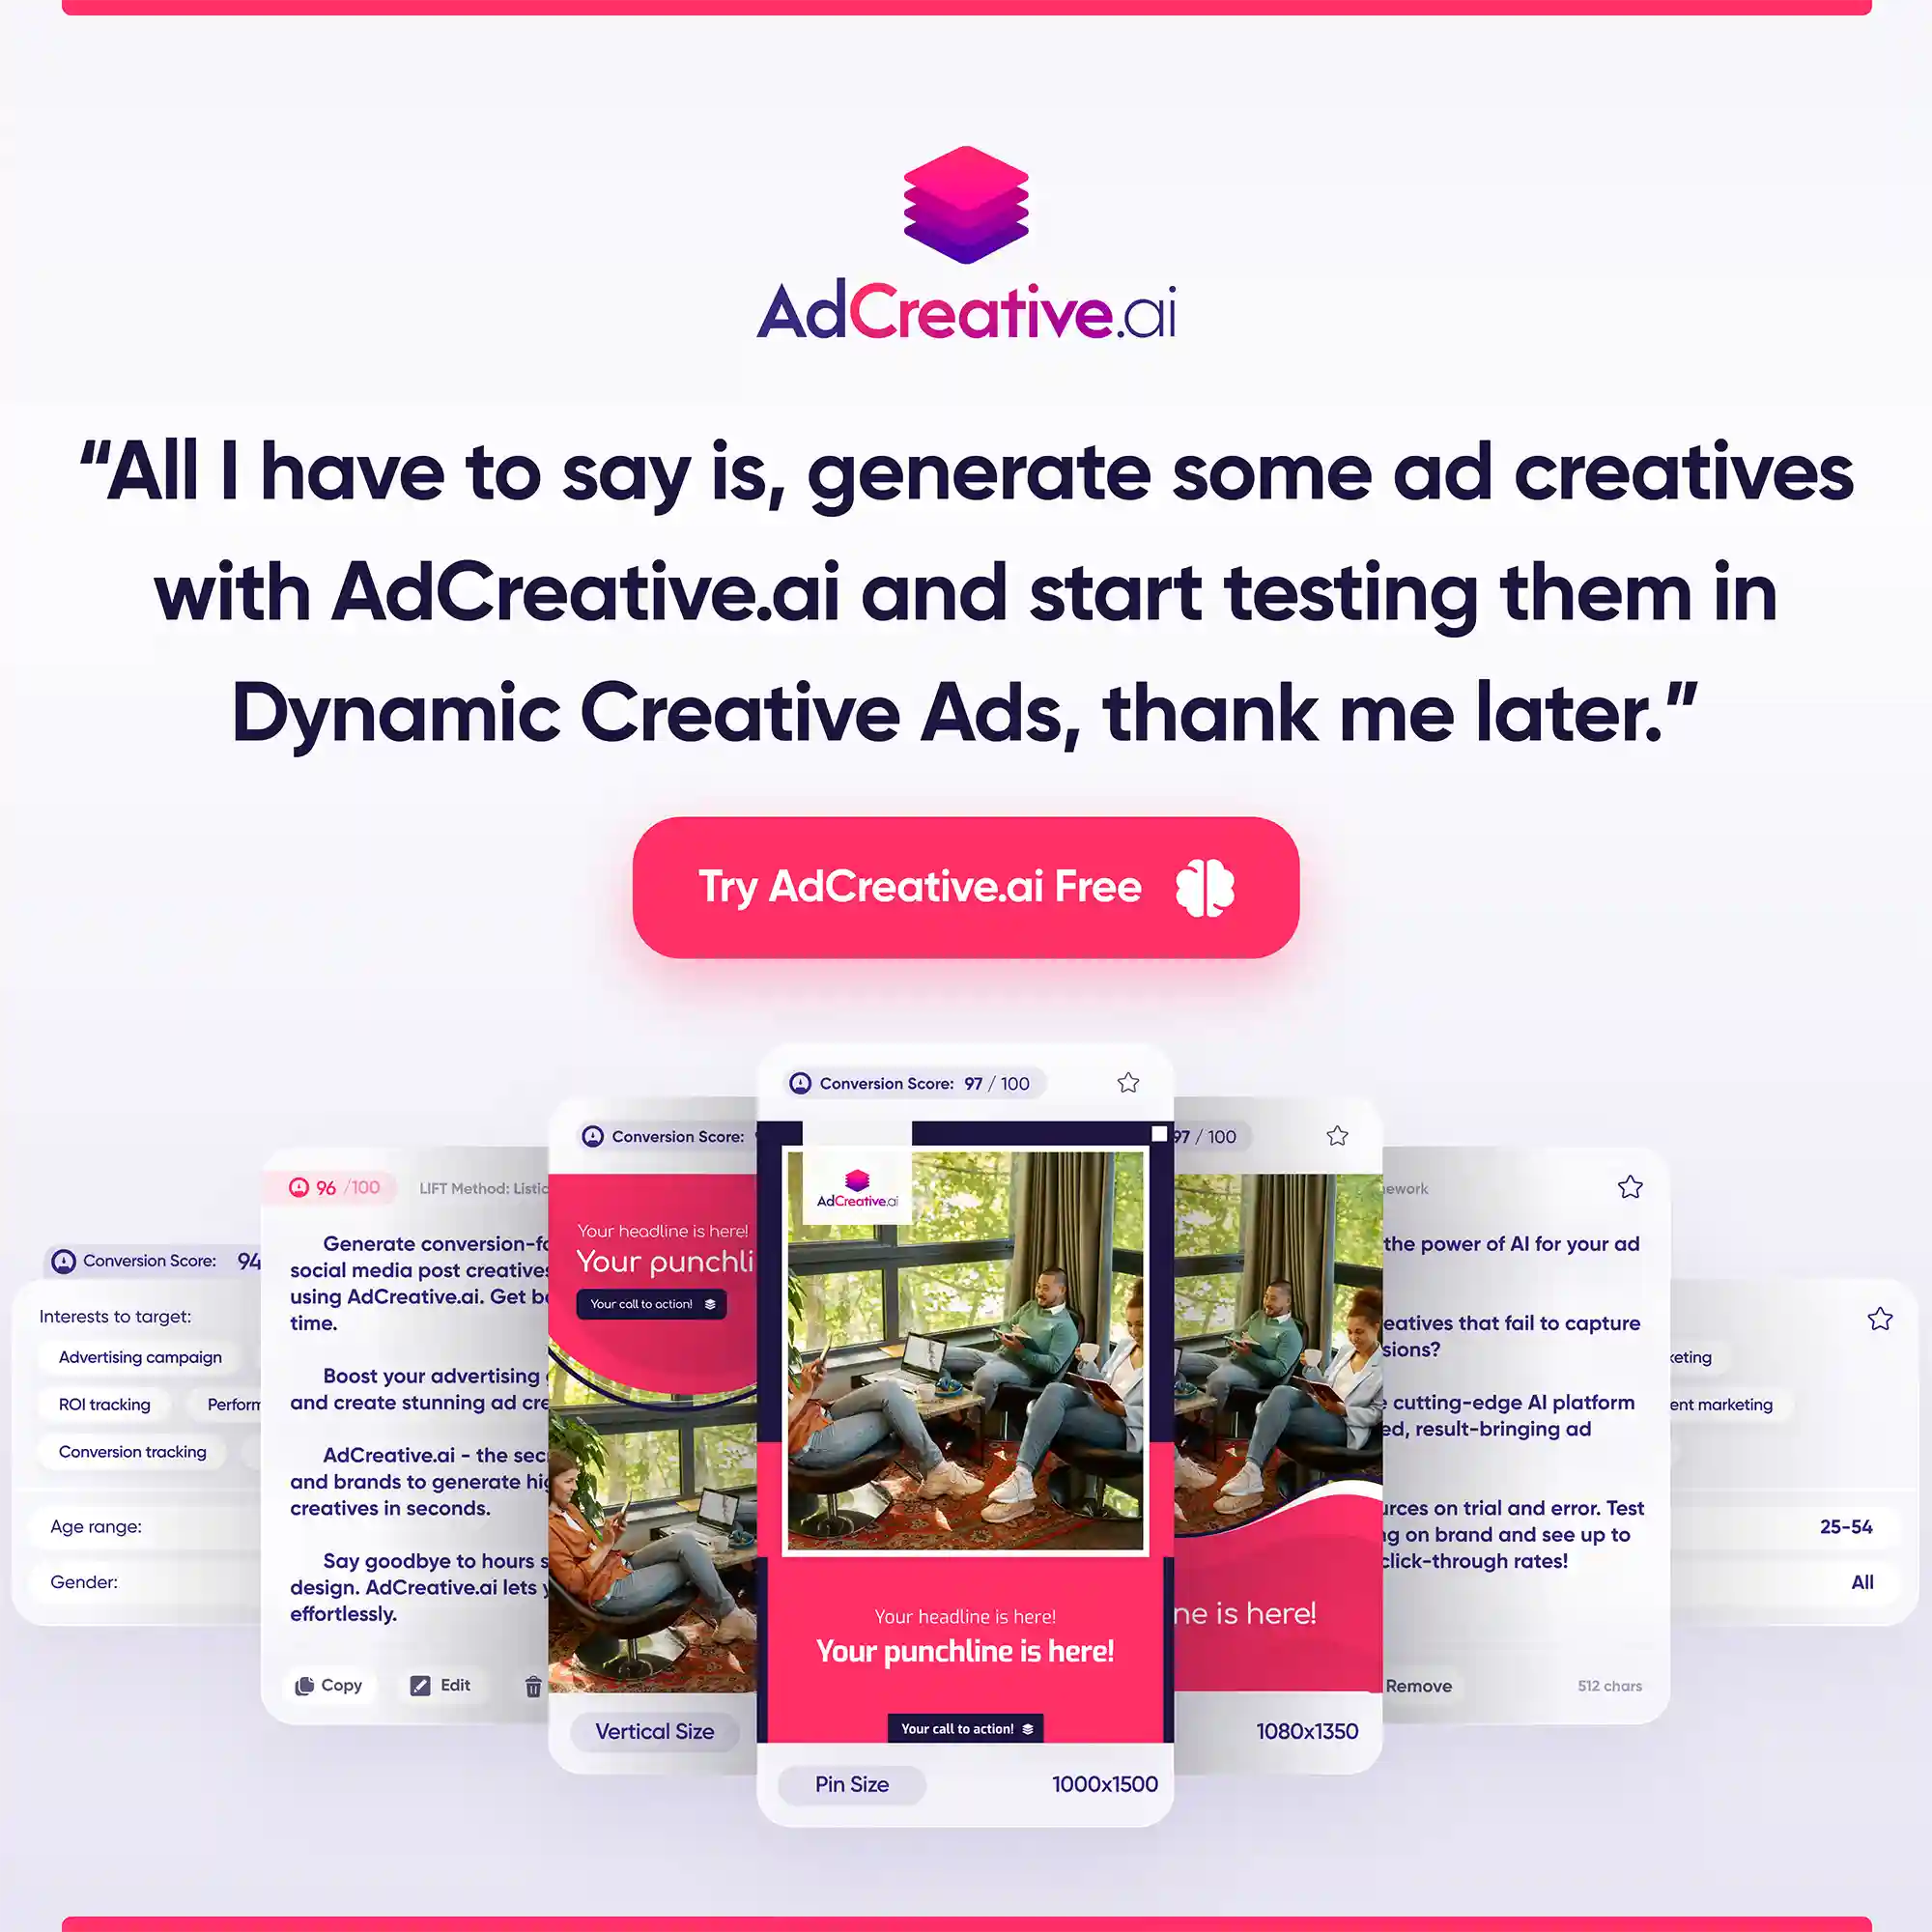 Check out the Create Ads with AI in 3 Clicks here.